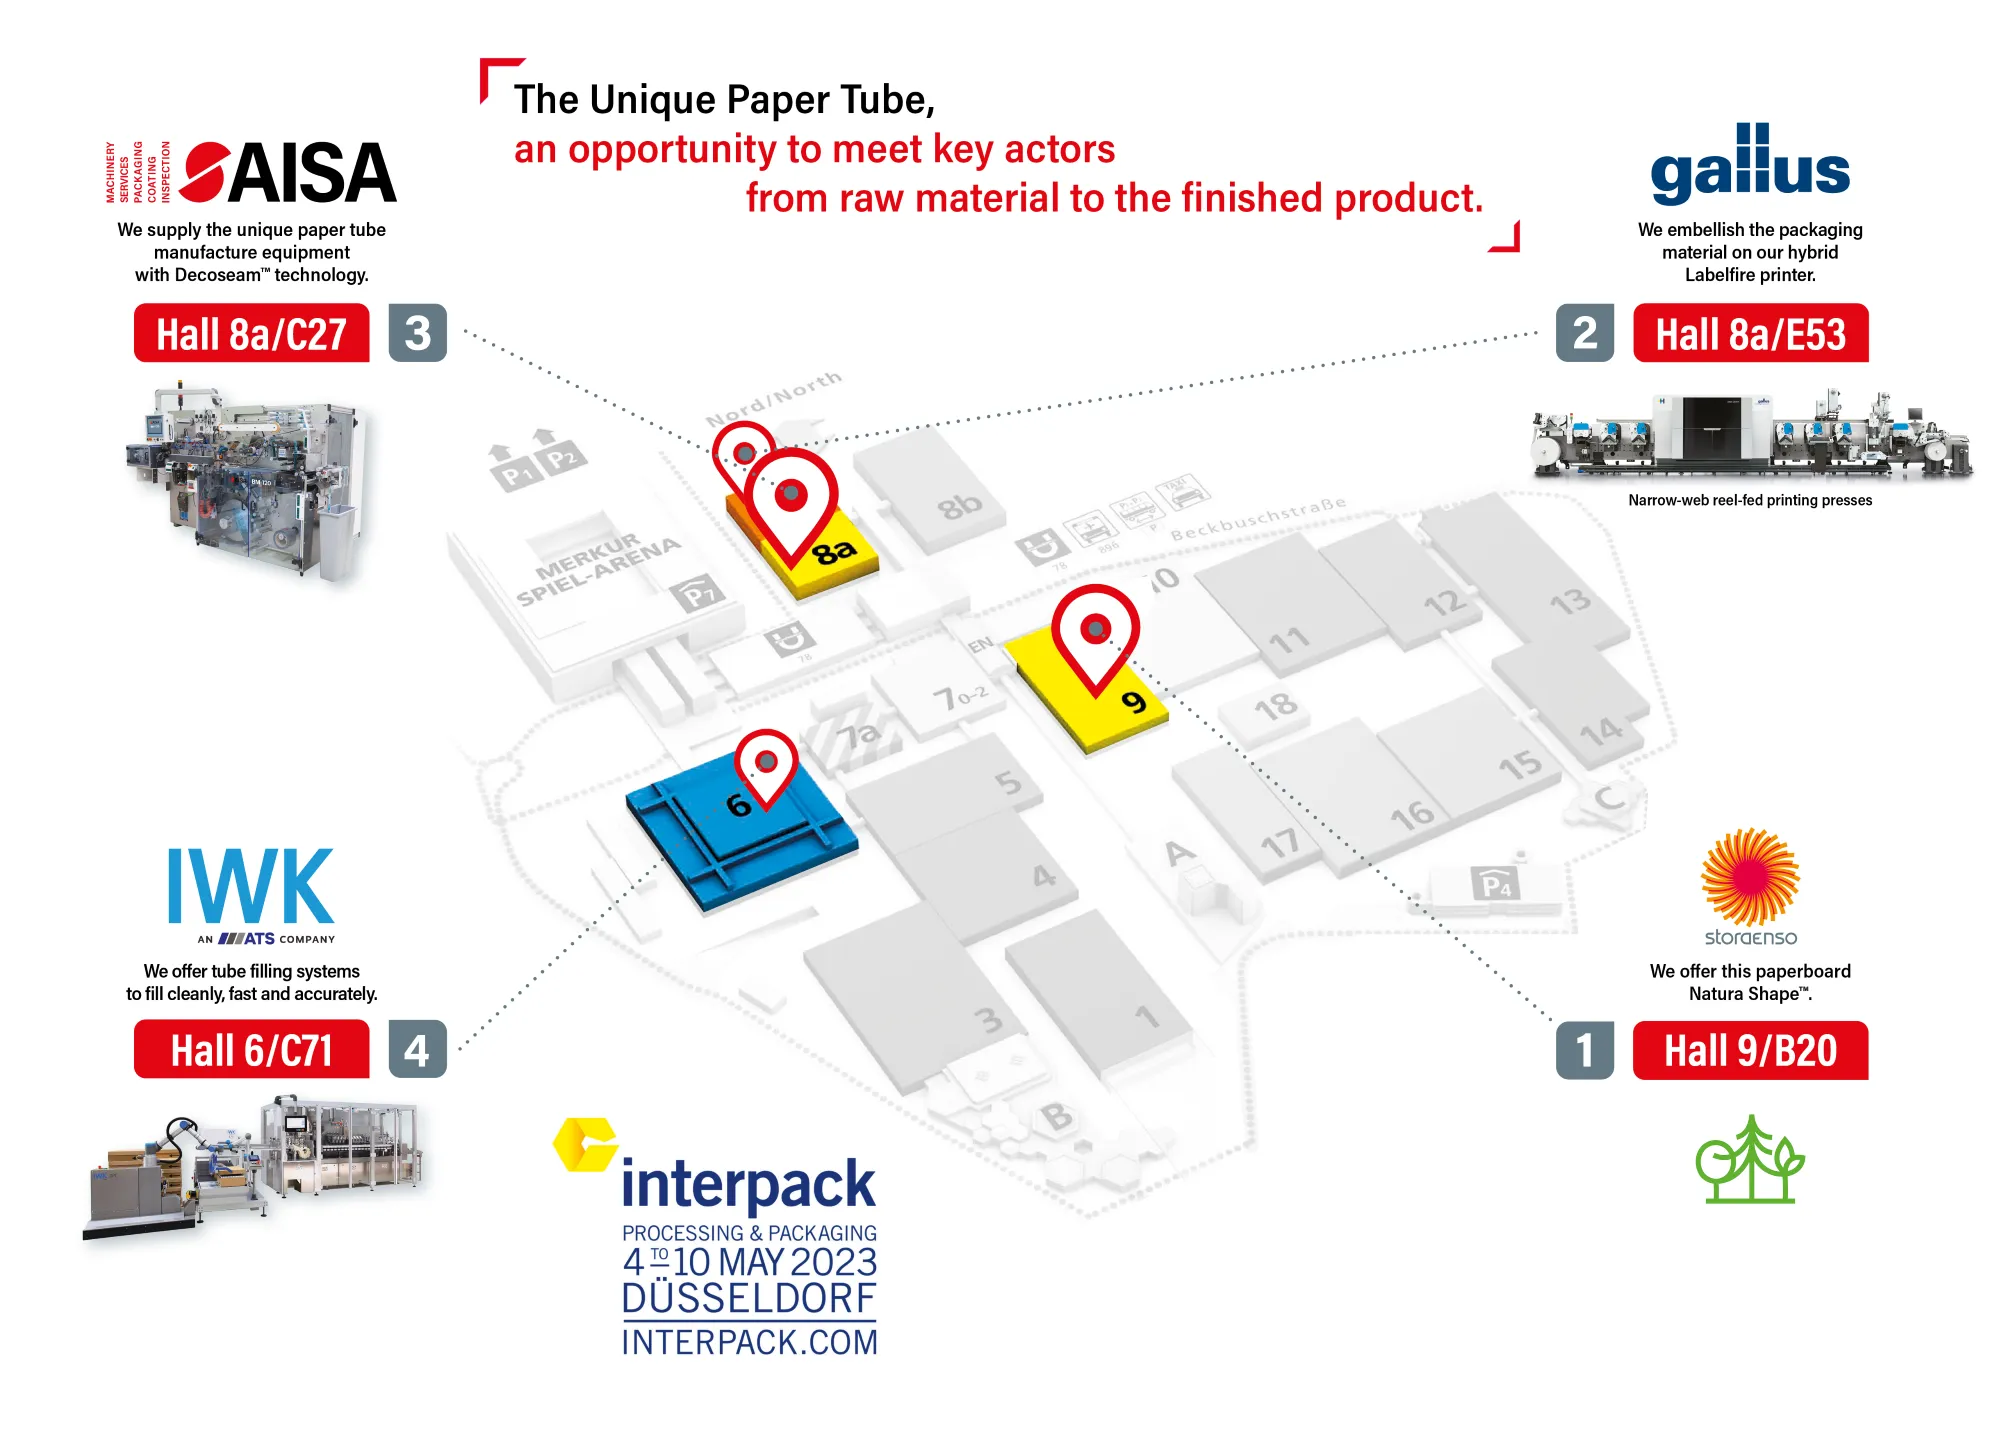 The Unique Paper Tube Map - Interpack 2023 Collaboration